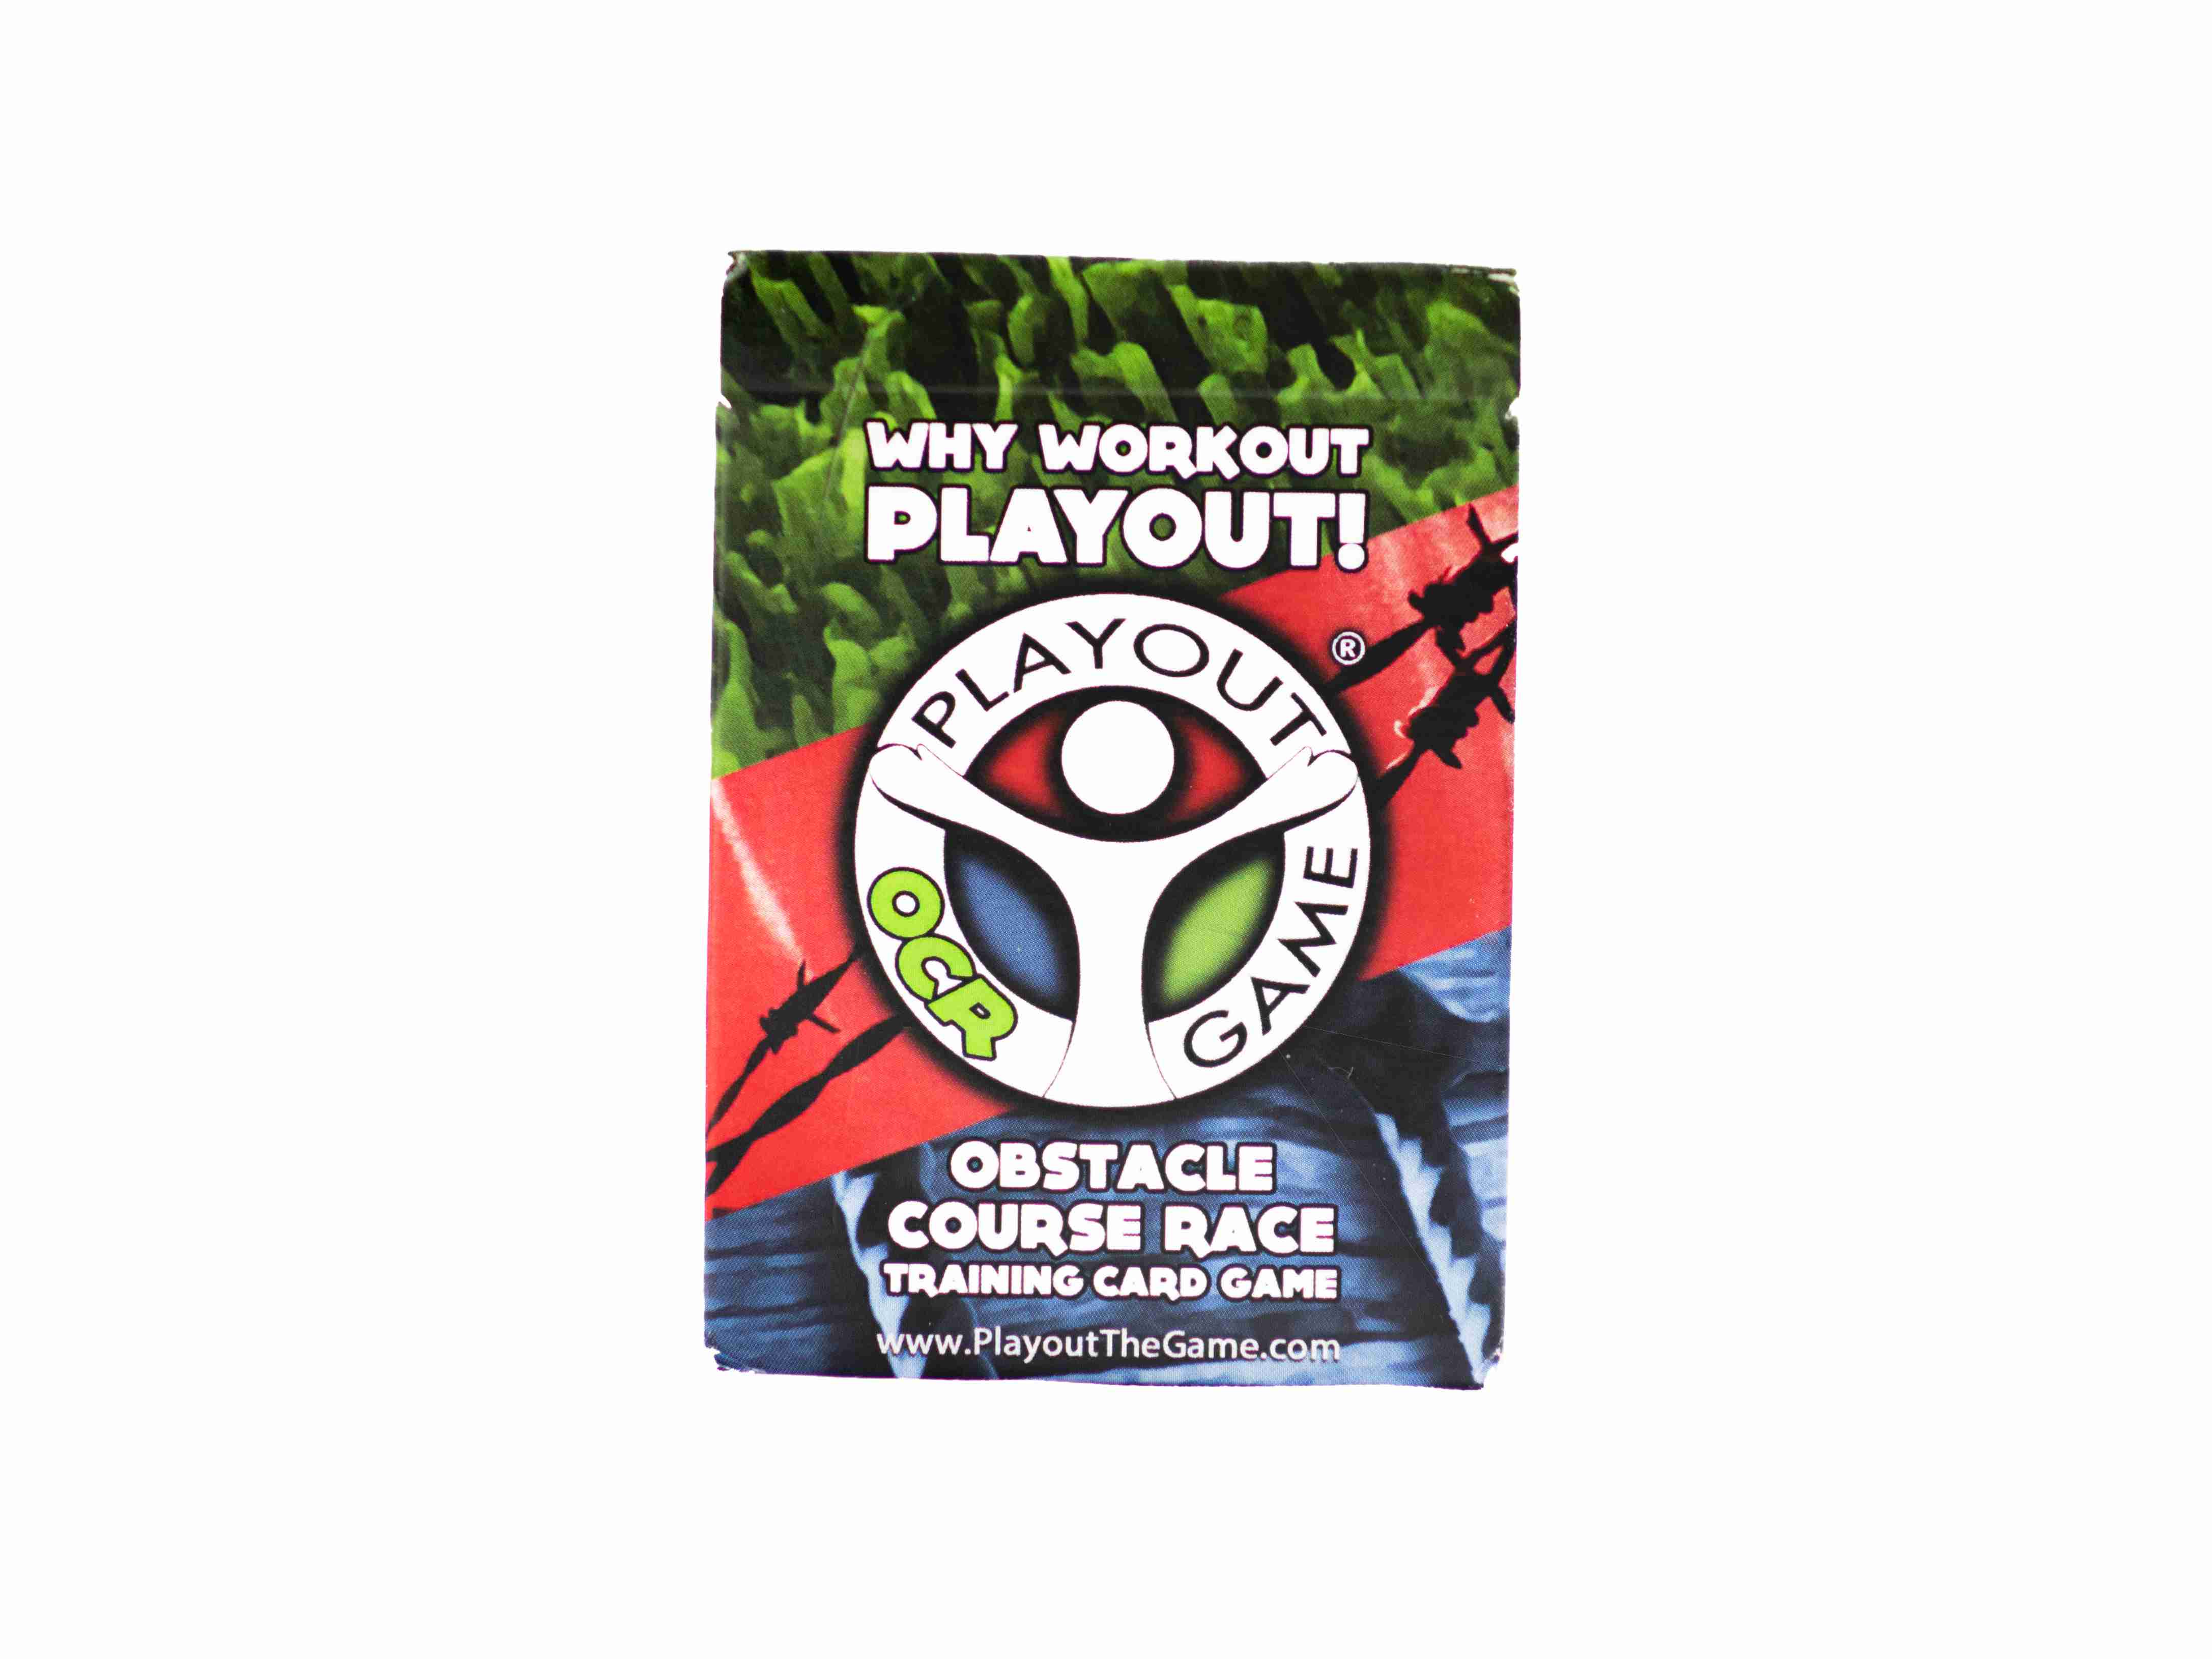 Playout: Obstacle Course Race Training Card Game